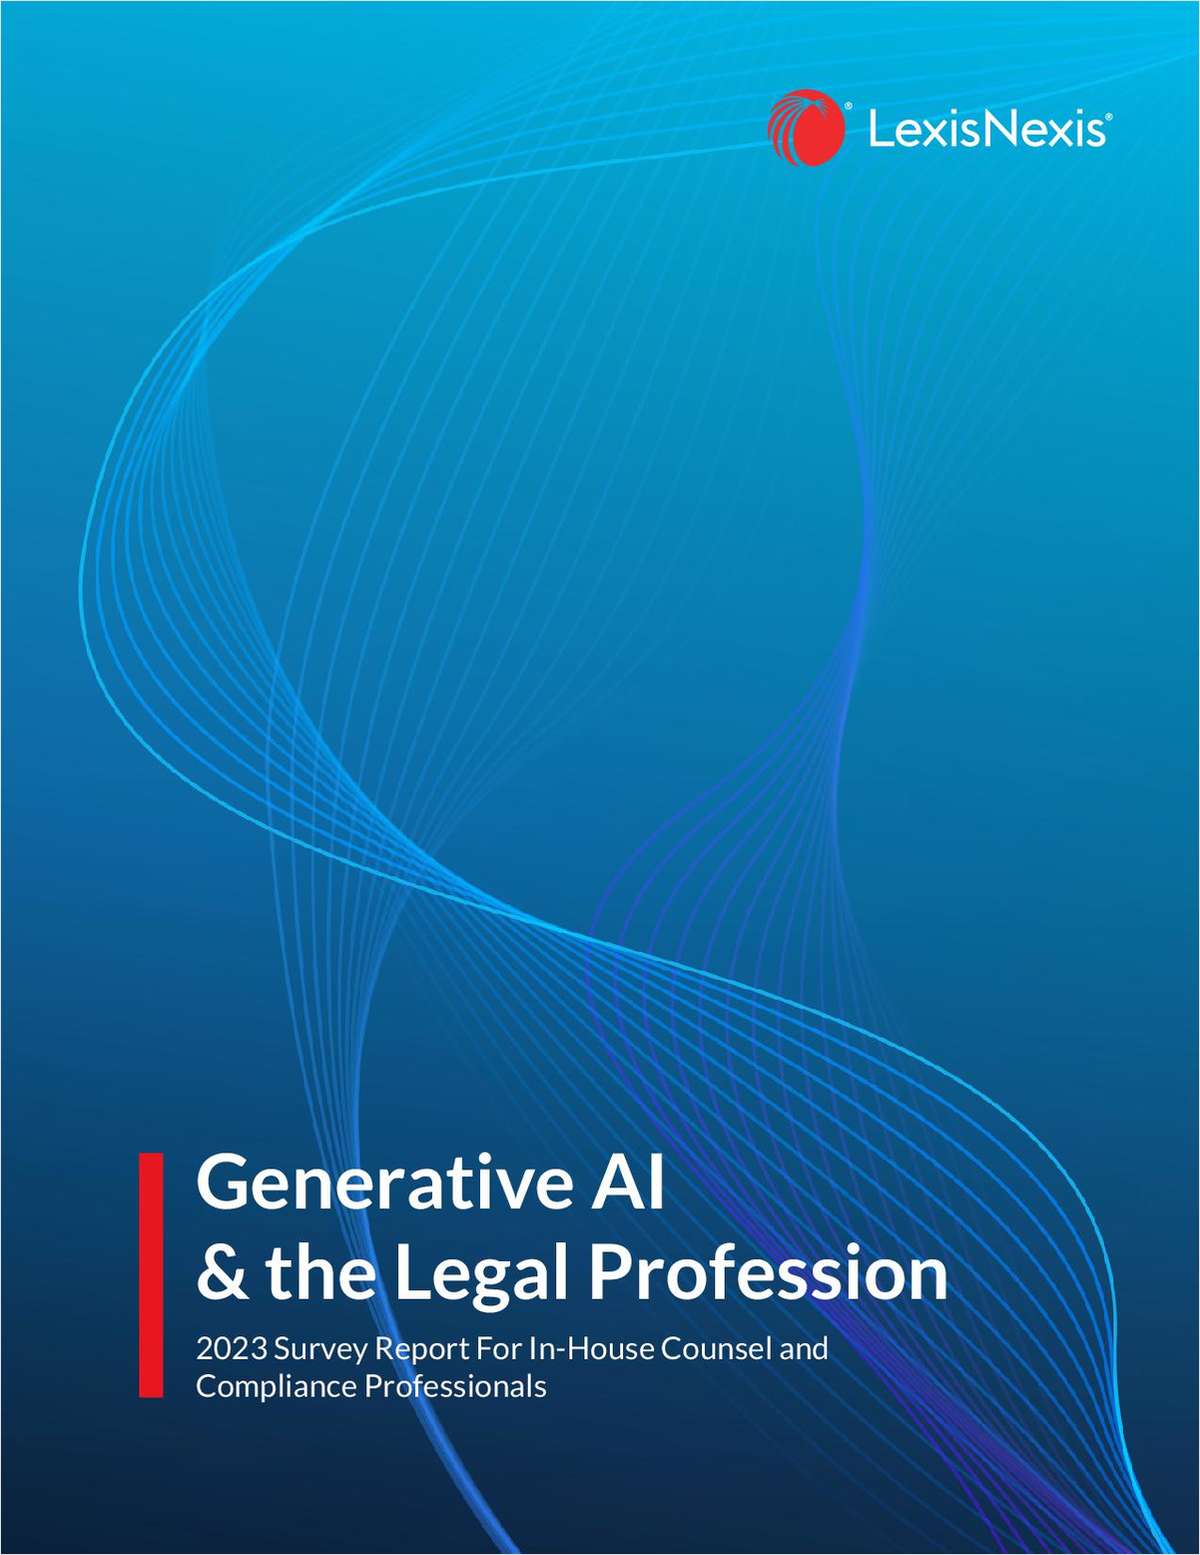 Explore the results of an extensive survey conducted in 2023 across 4,000+ professionals to help legal and business leaders better understand the use of generative artificial intelligence (GAI) in the workplace.